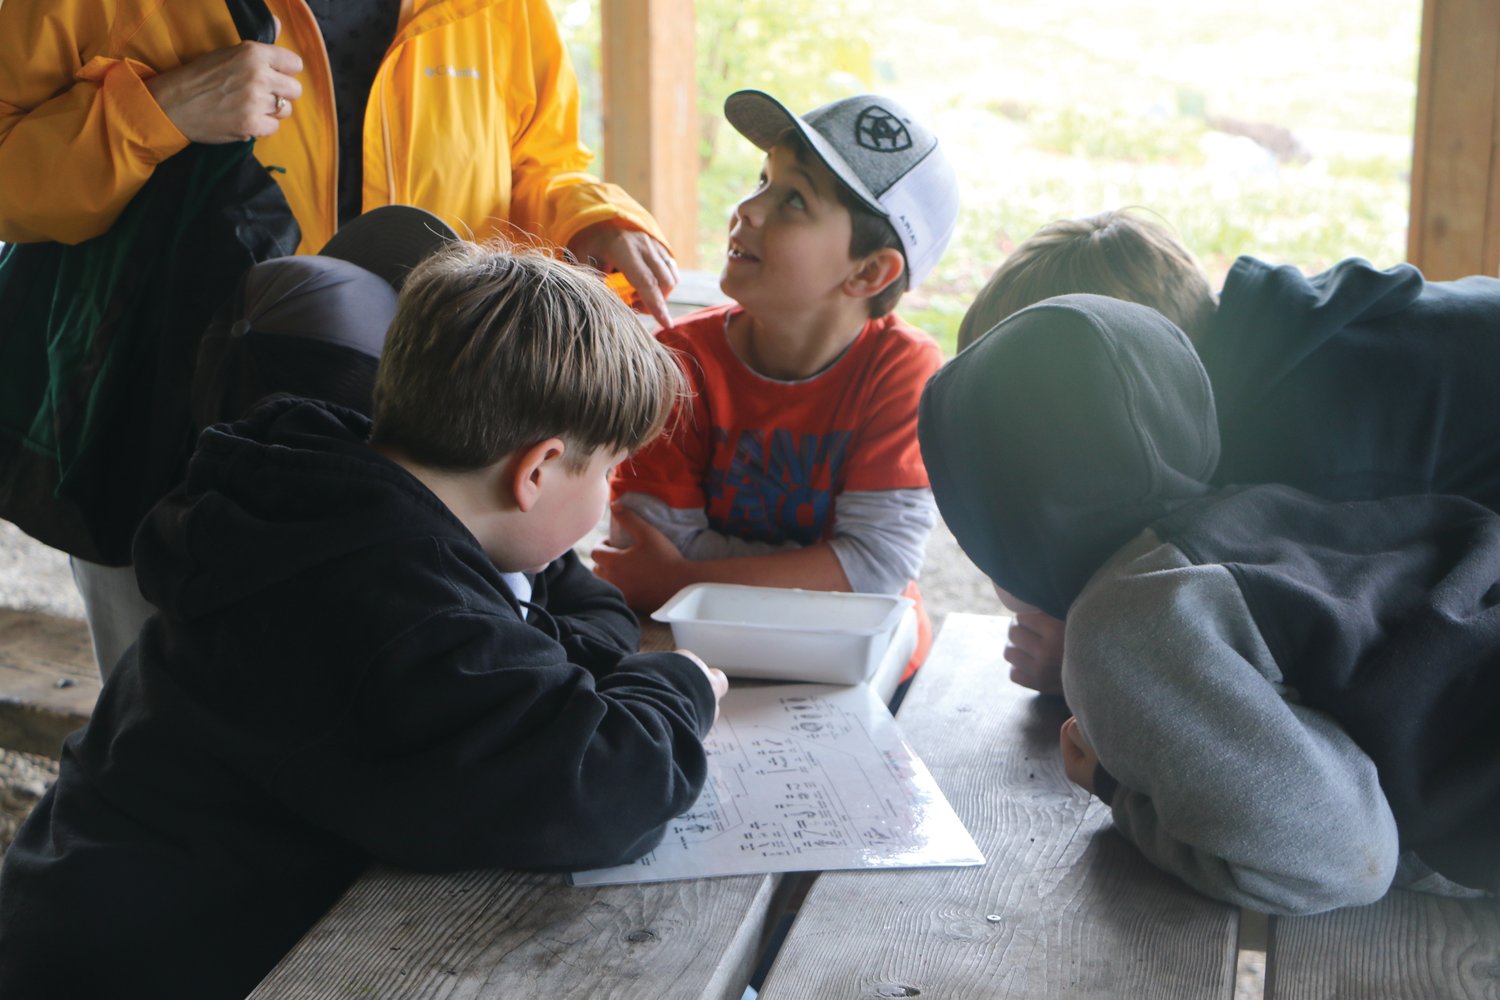 Students review information on insect life in Chimacum Creek during the salmon-release day.